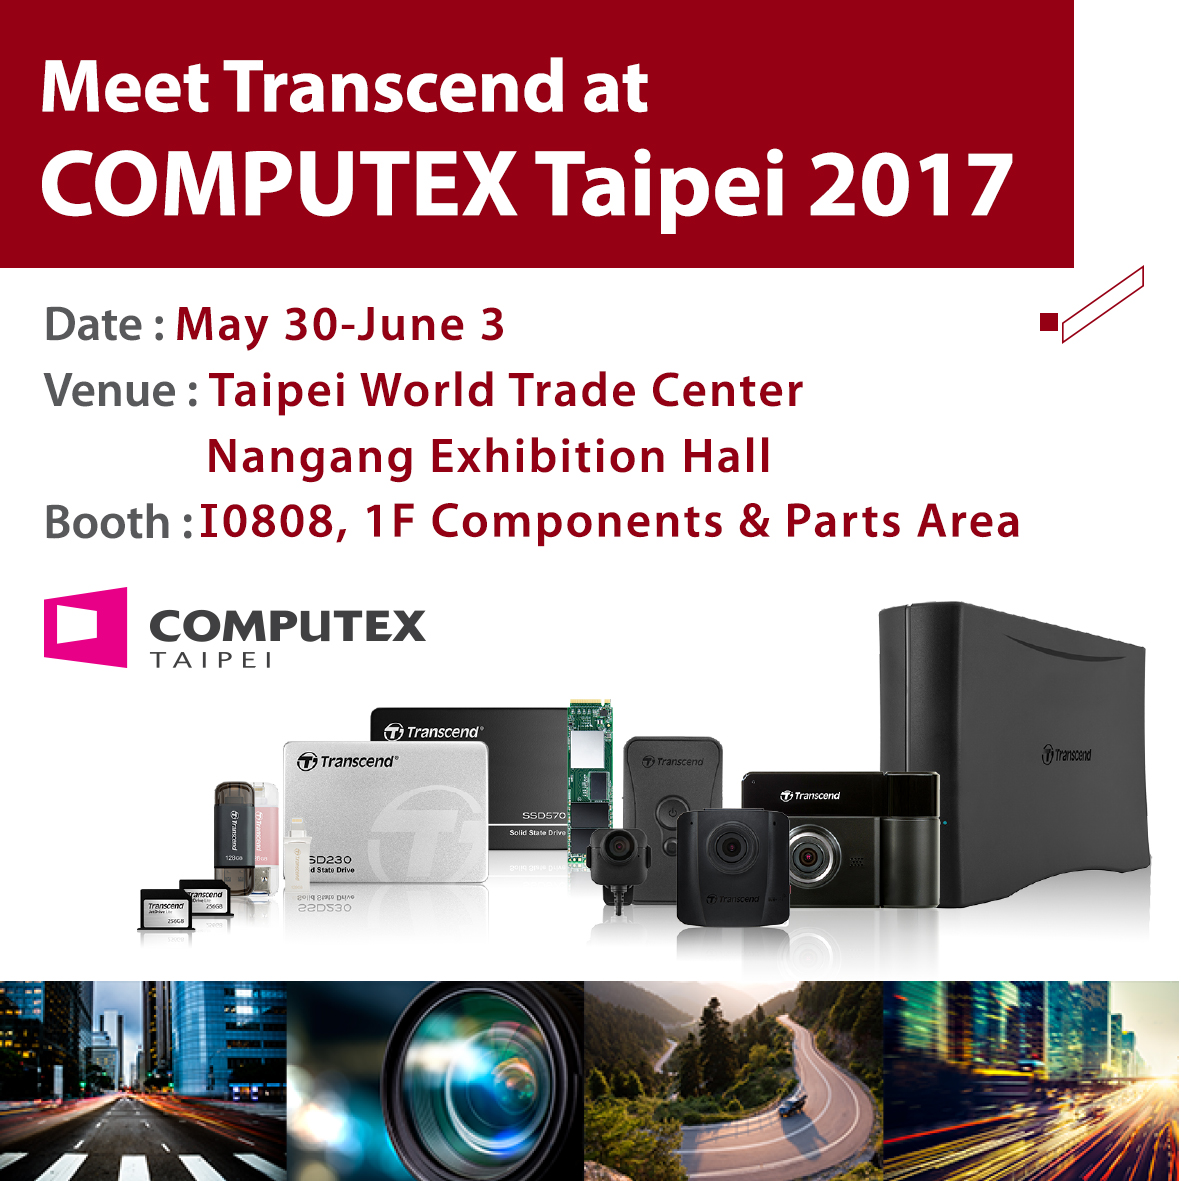 Transcend to Announce Blazing Fast PCIe SSD and Embedded Solutions at COMPUTEX 2017